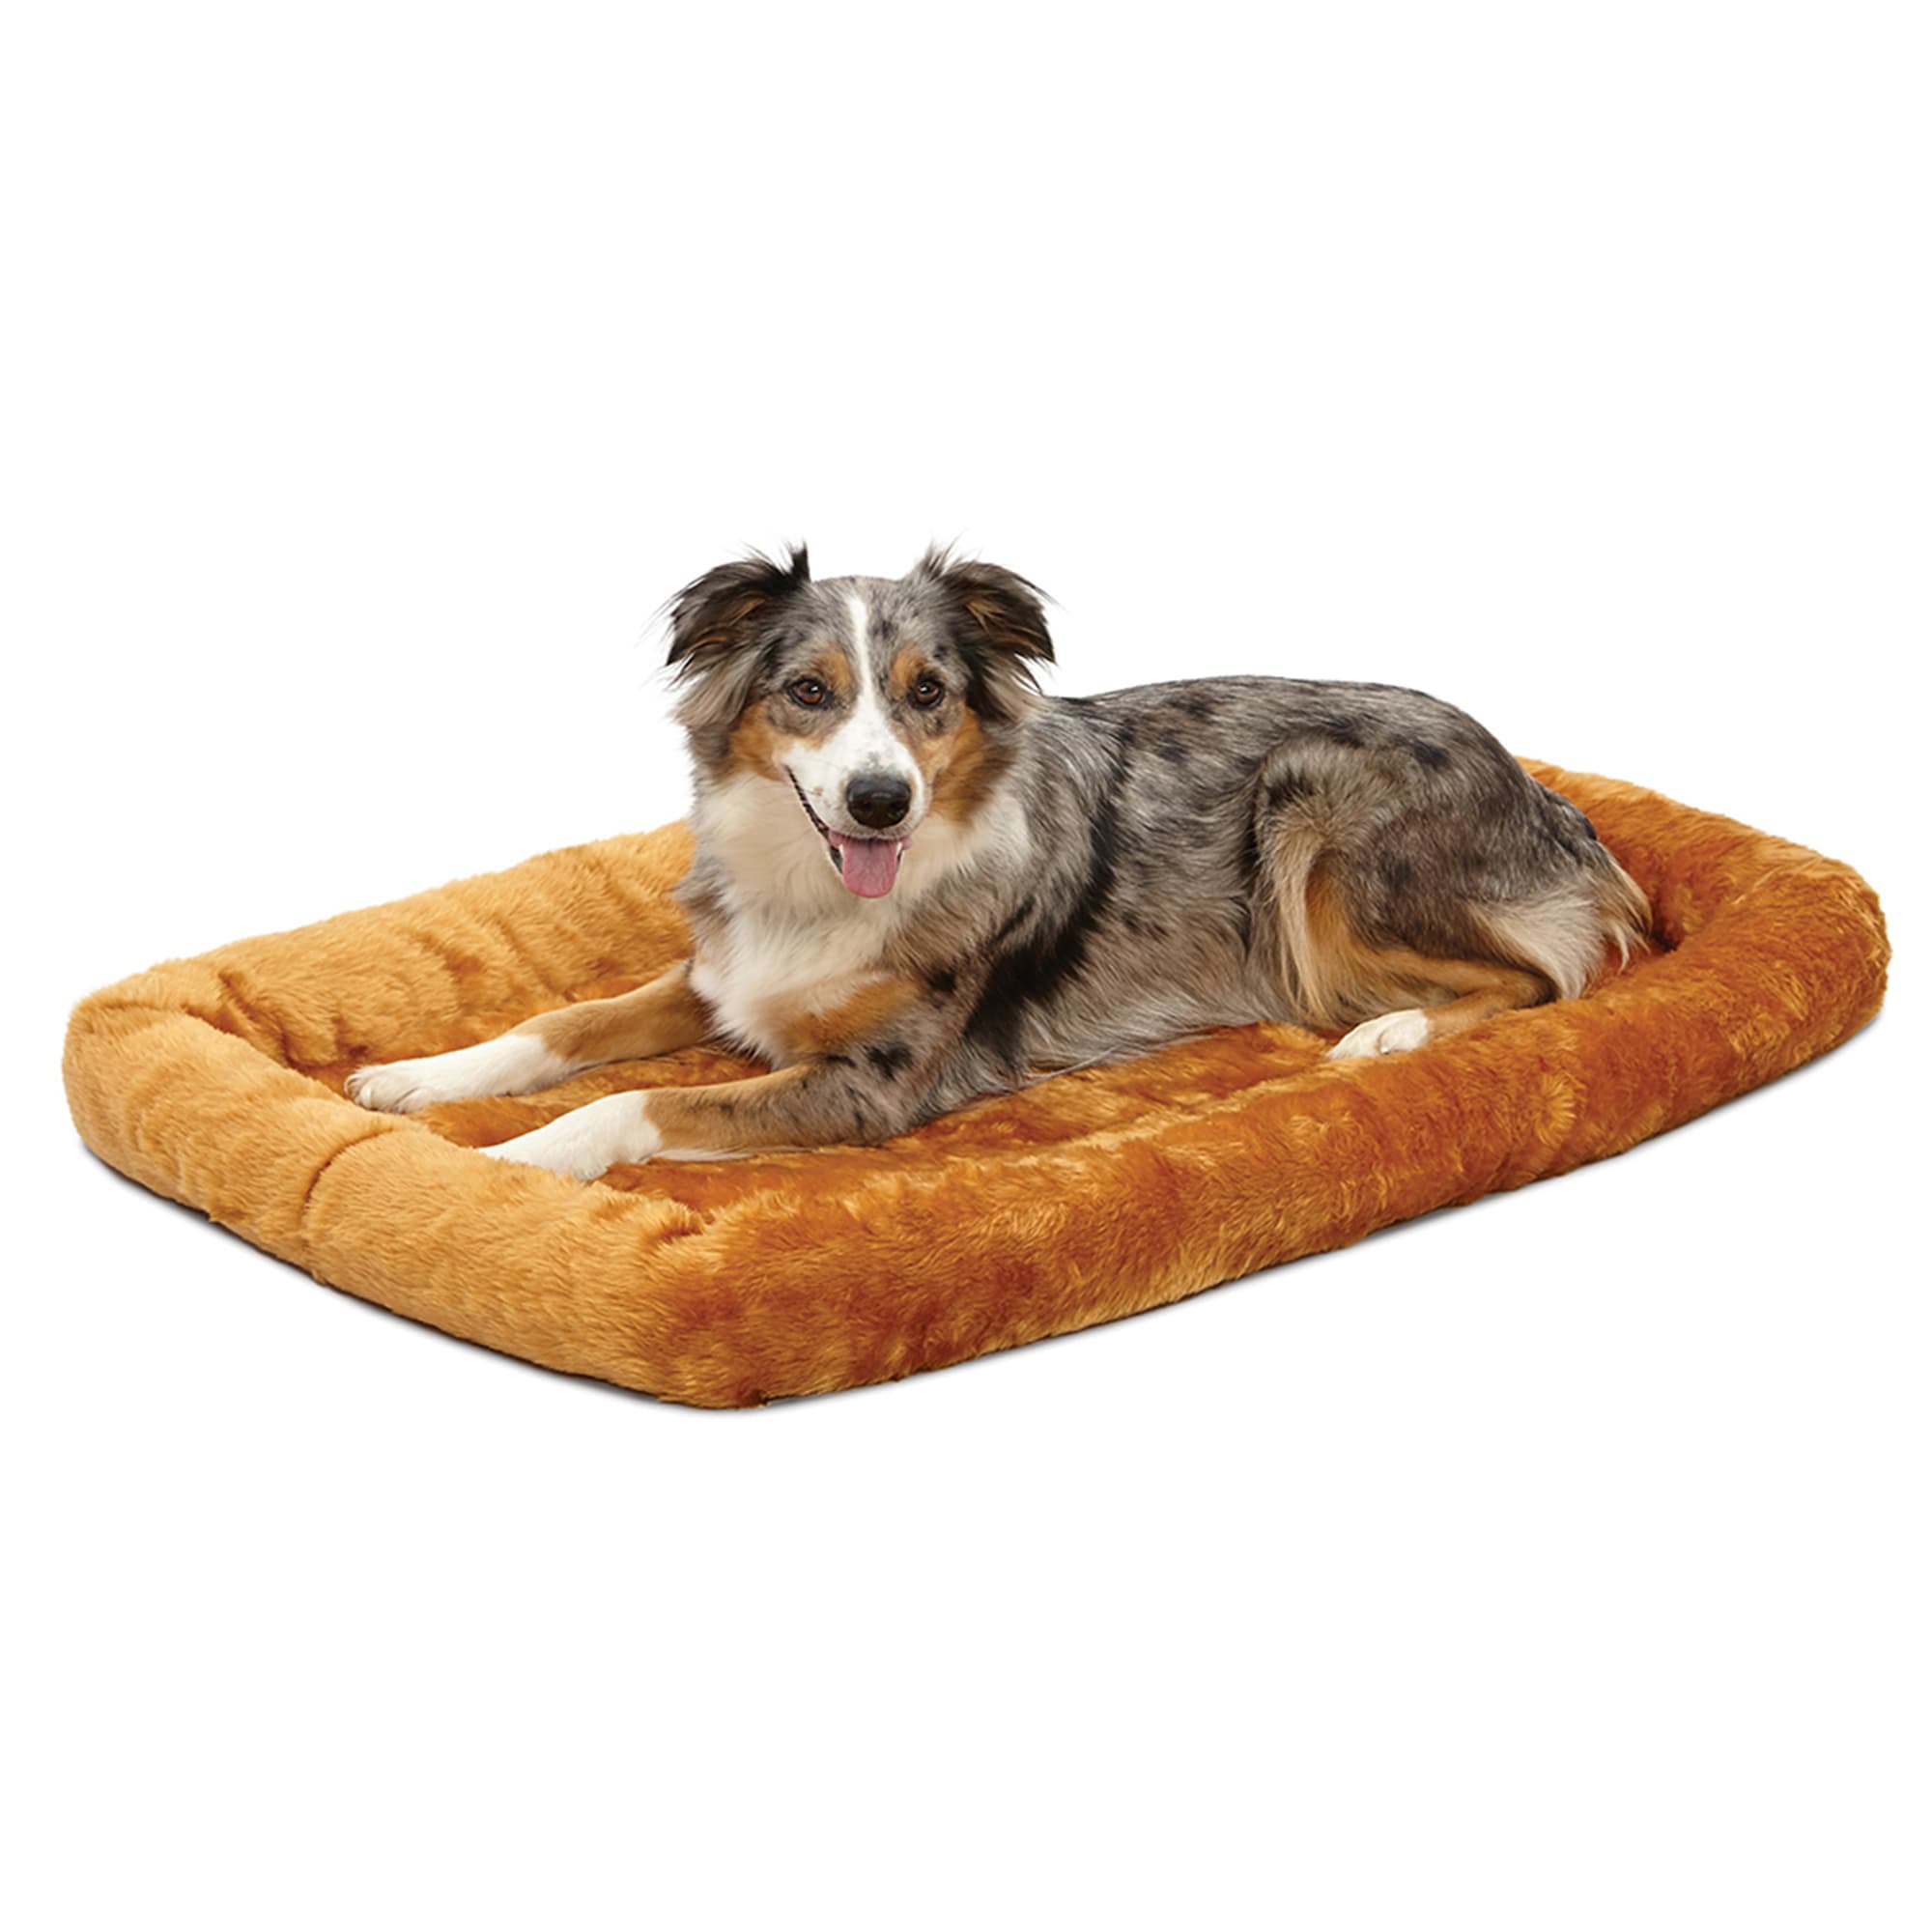 Photos - Bed & Furniture Midwest Quiet Time Bolster Cinnamon Dog Bed, 42" L X 26" W, X-Larg 